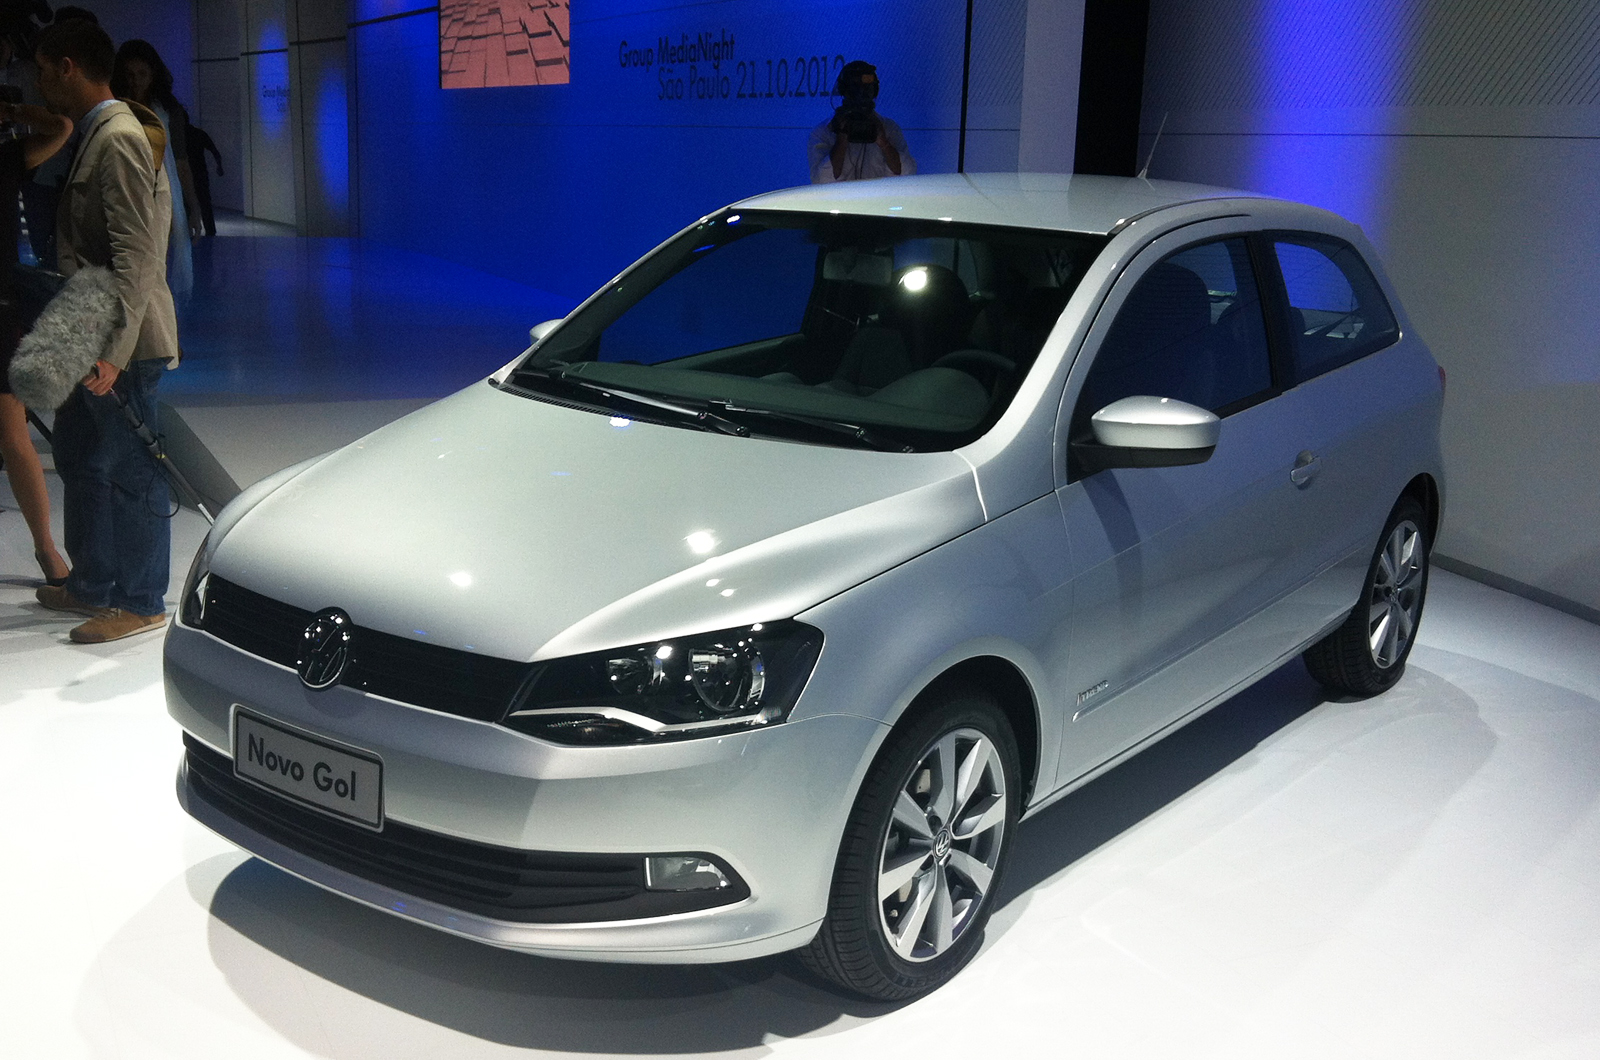 New VW Gol GT Concept Debuts At Sao Paulo Motor Show